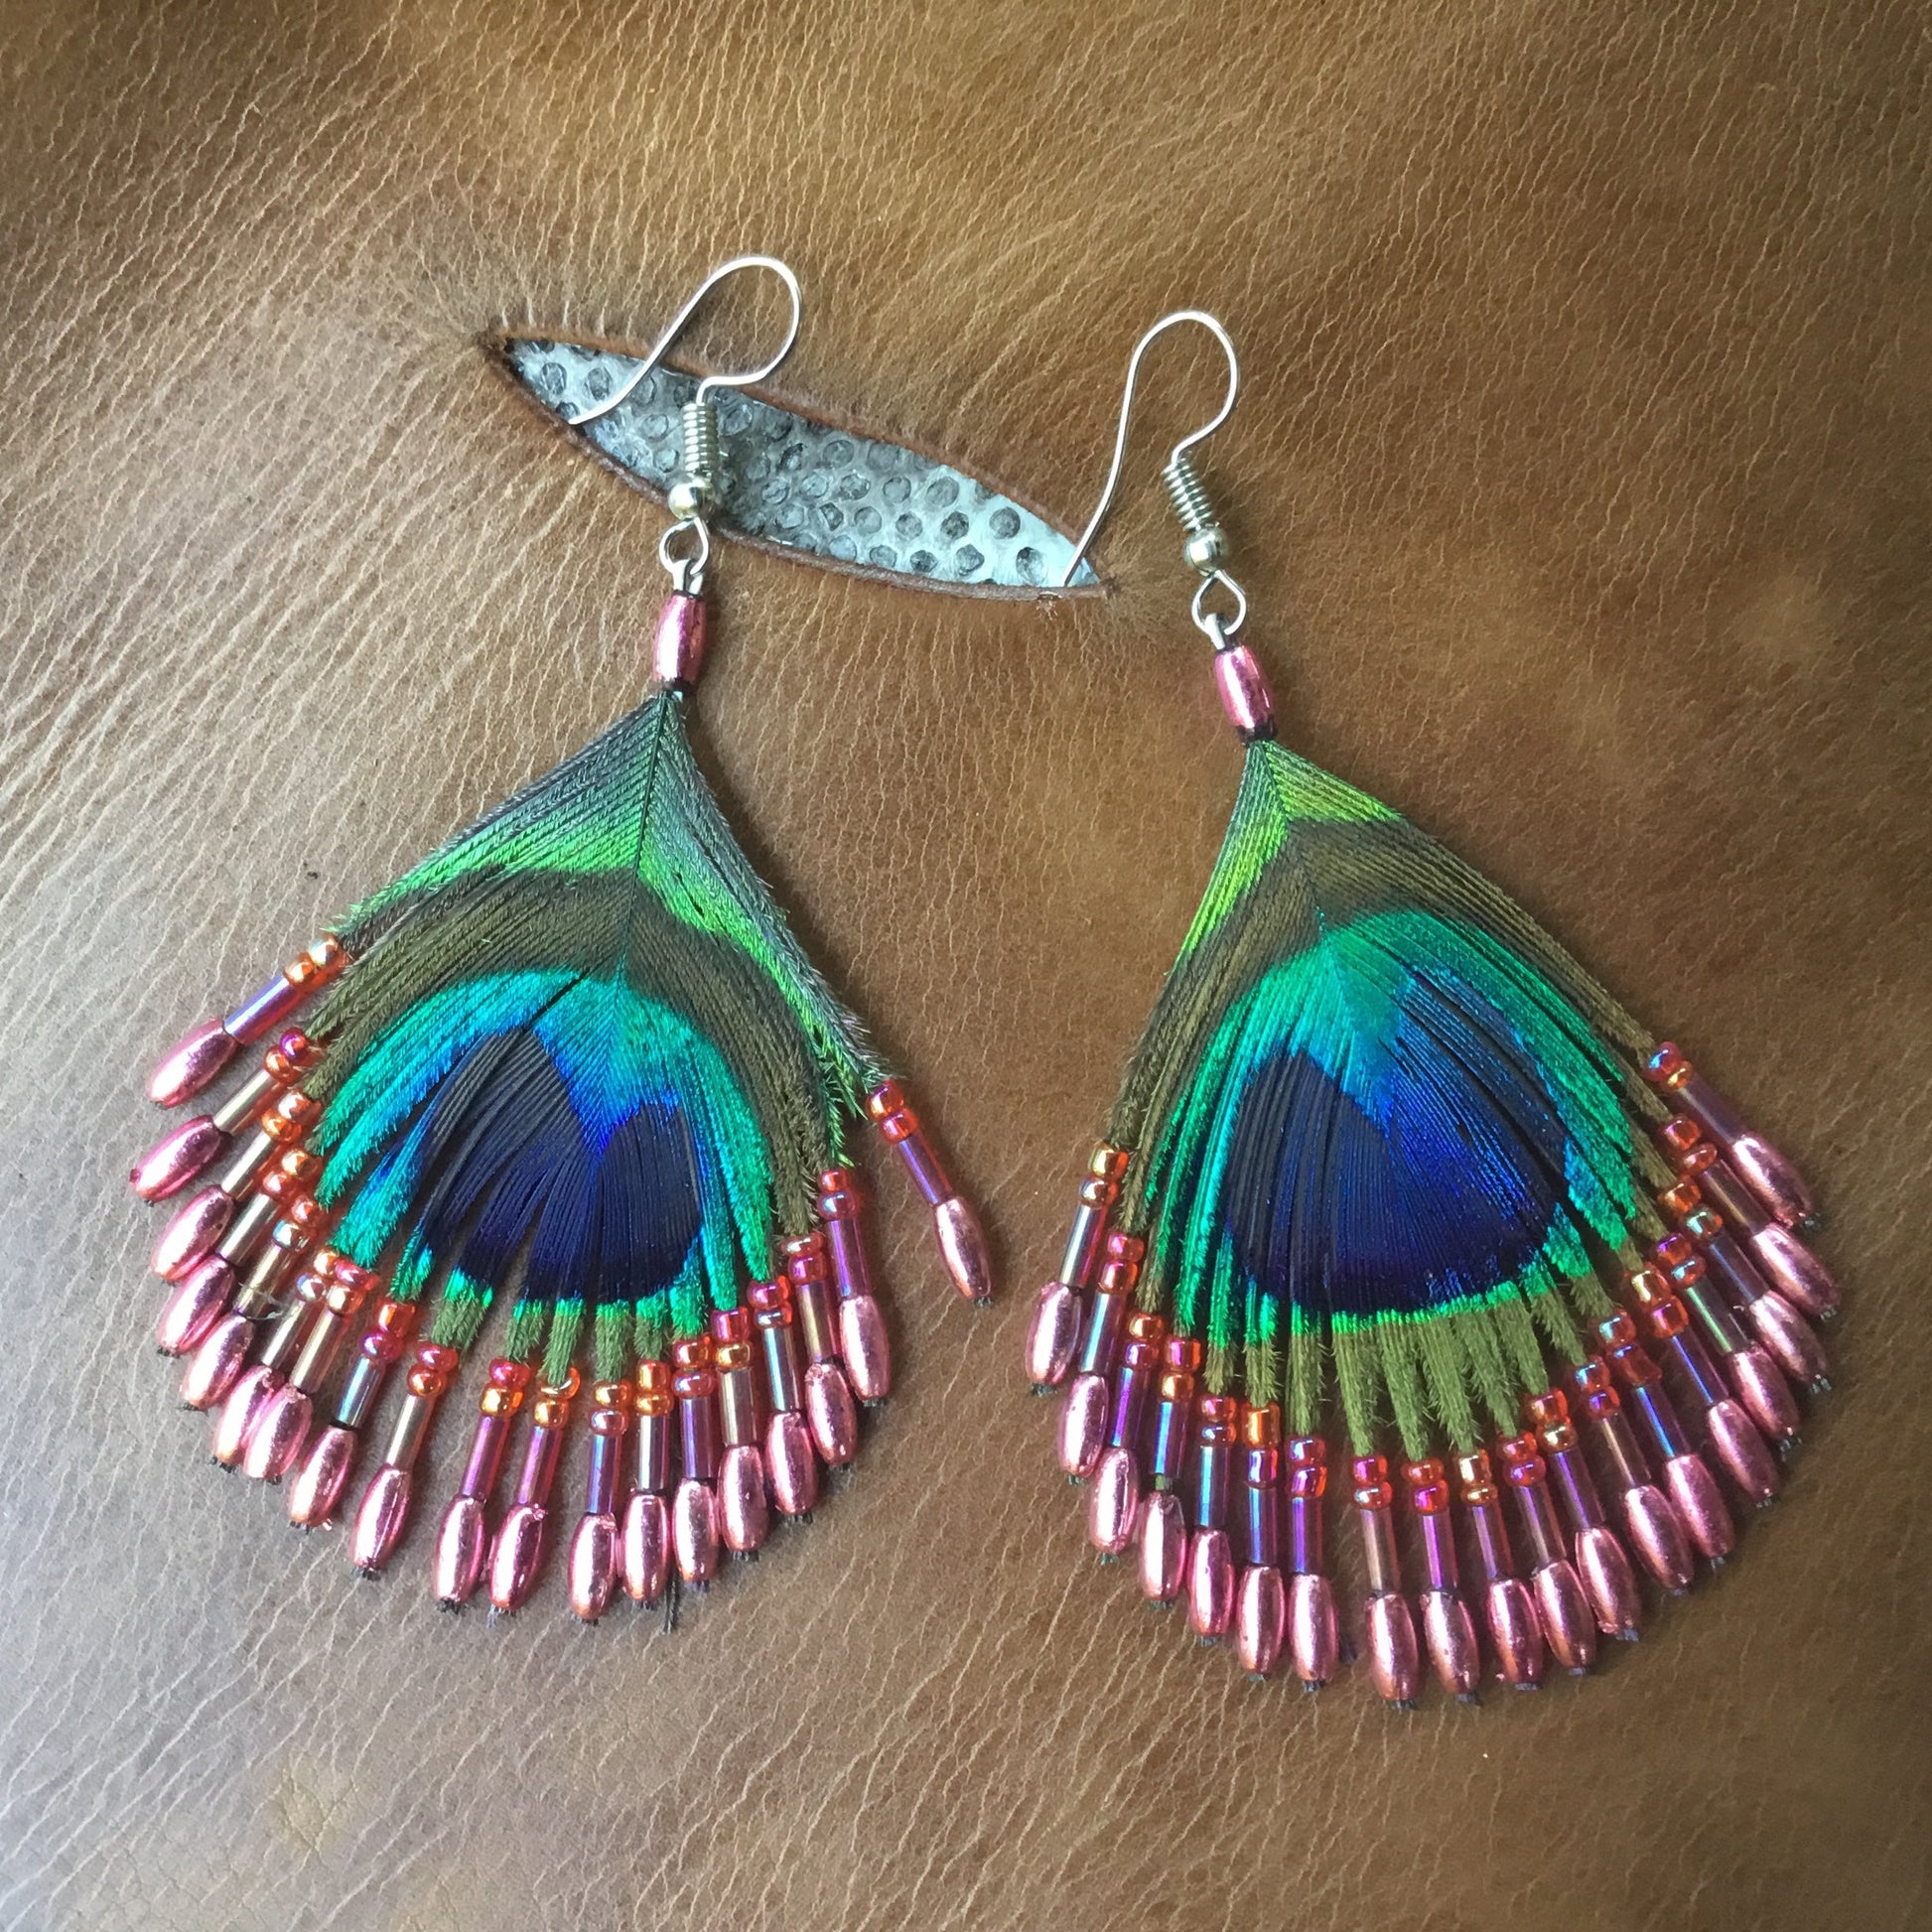 coral pink bead and peacock eye feather earrings.